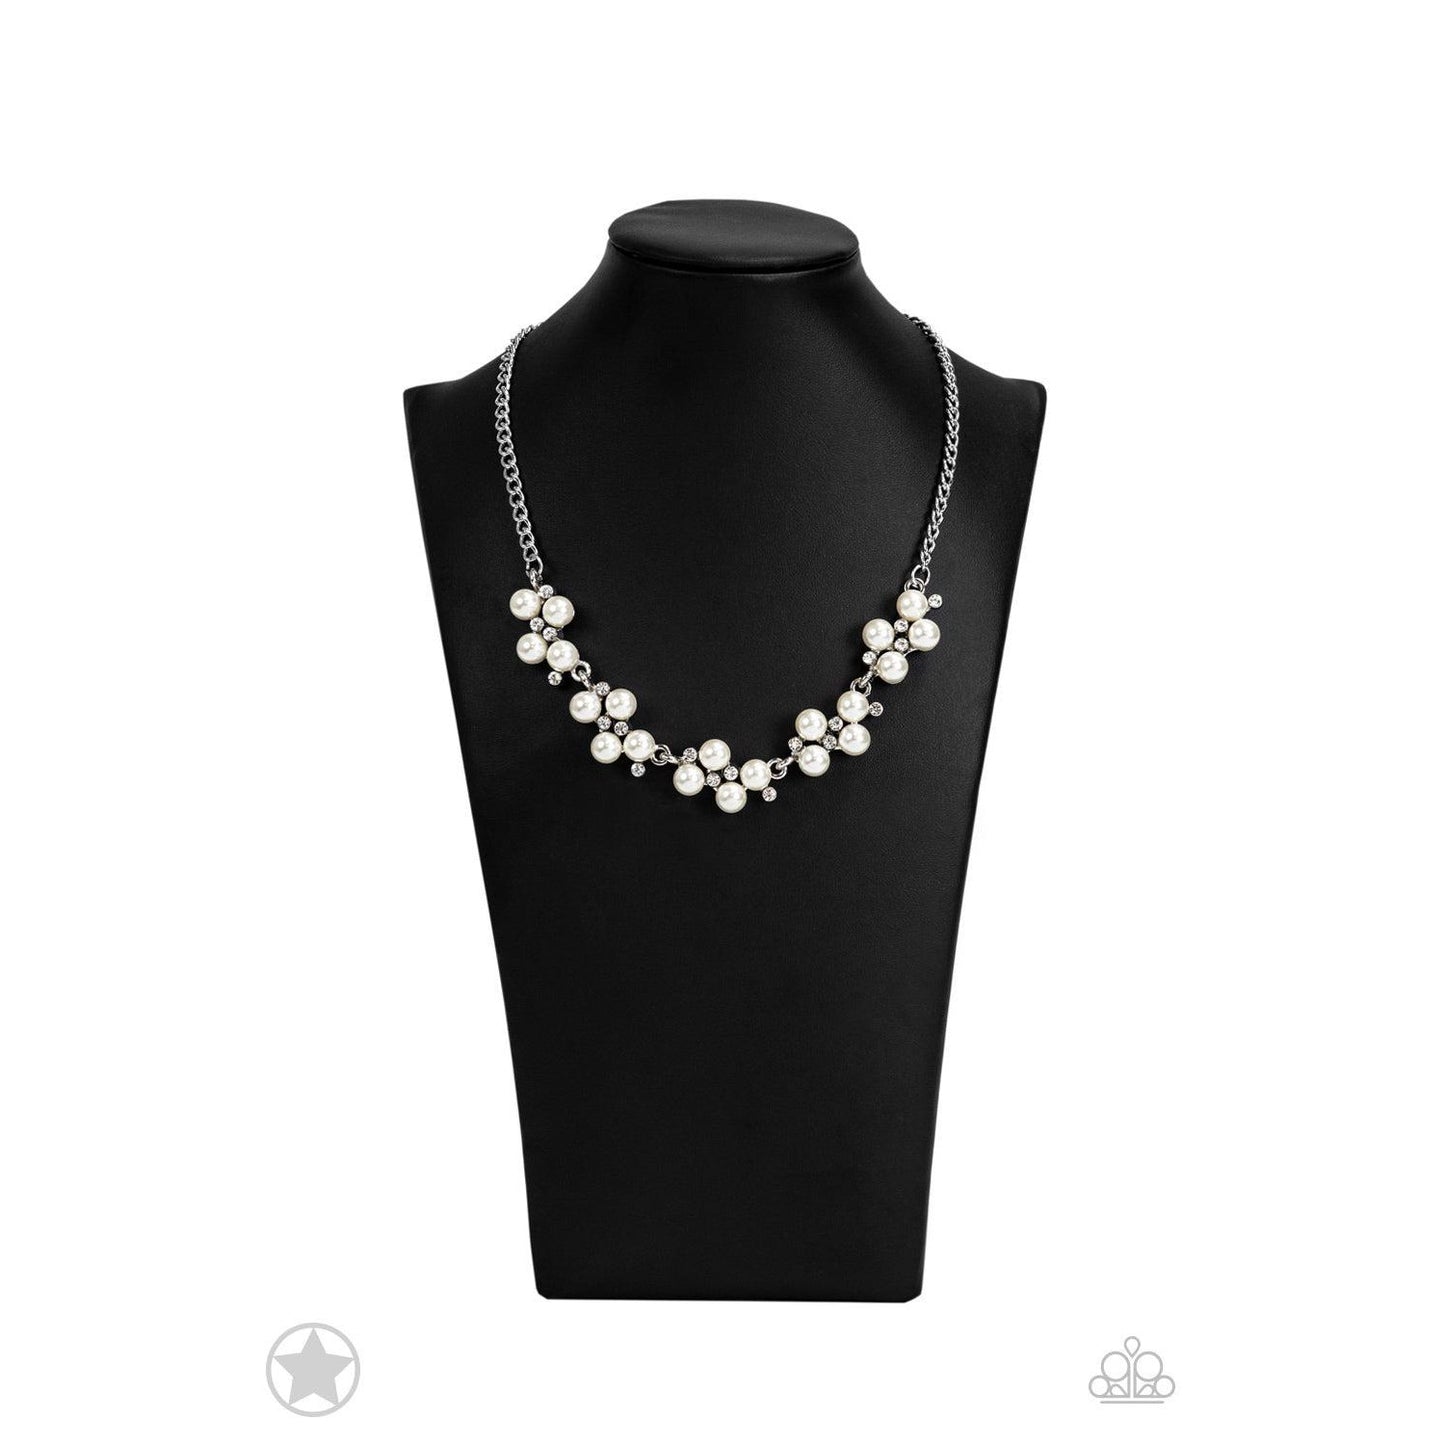 Love Story - White Pearl Necklace - Bling by Danielle Baker